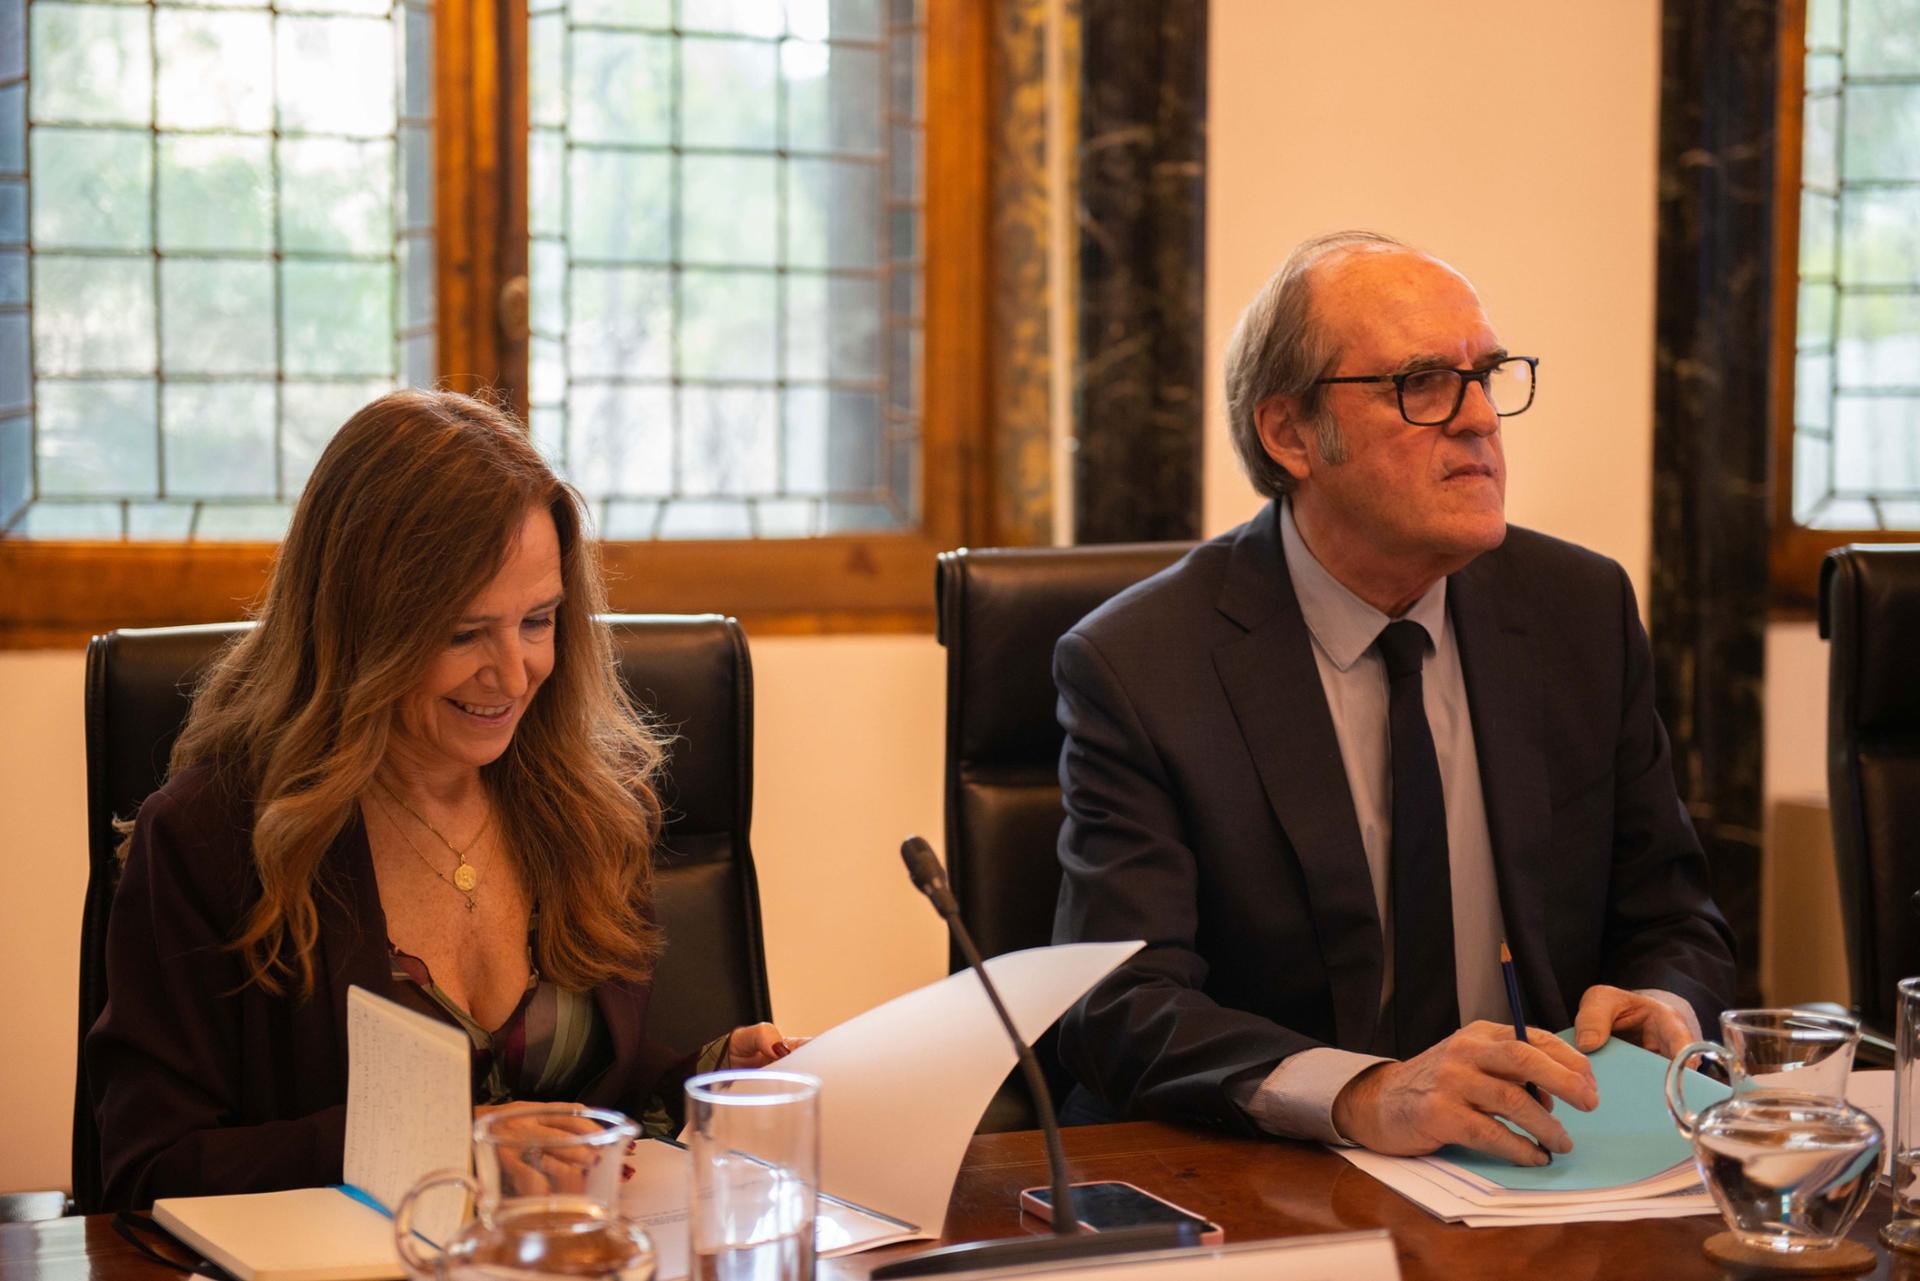 Ombudsman Angel Gabilondo (right) oversees investigation in sexual abuse cases within Spain's Catholic Church.